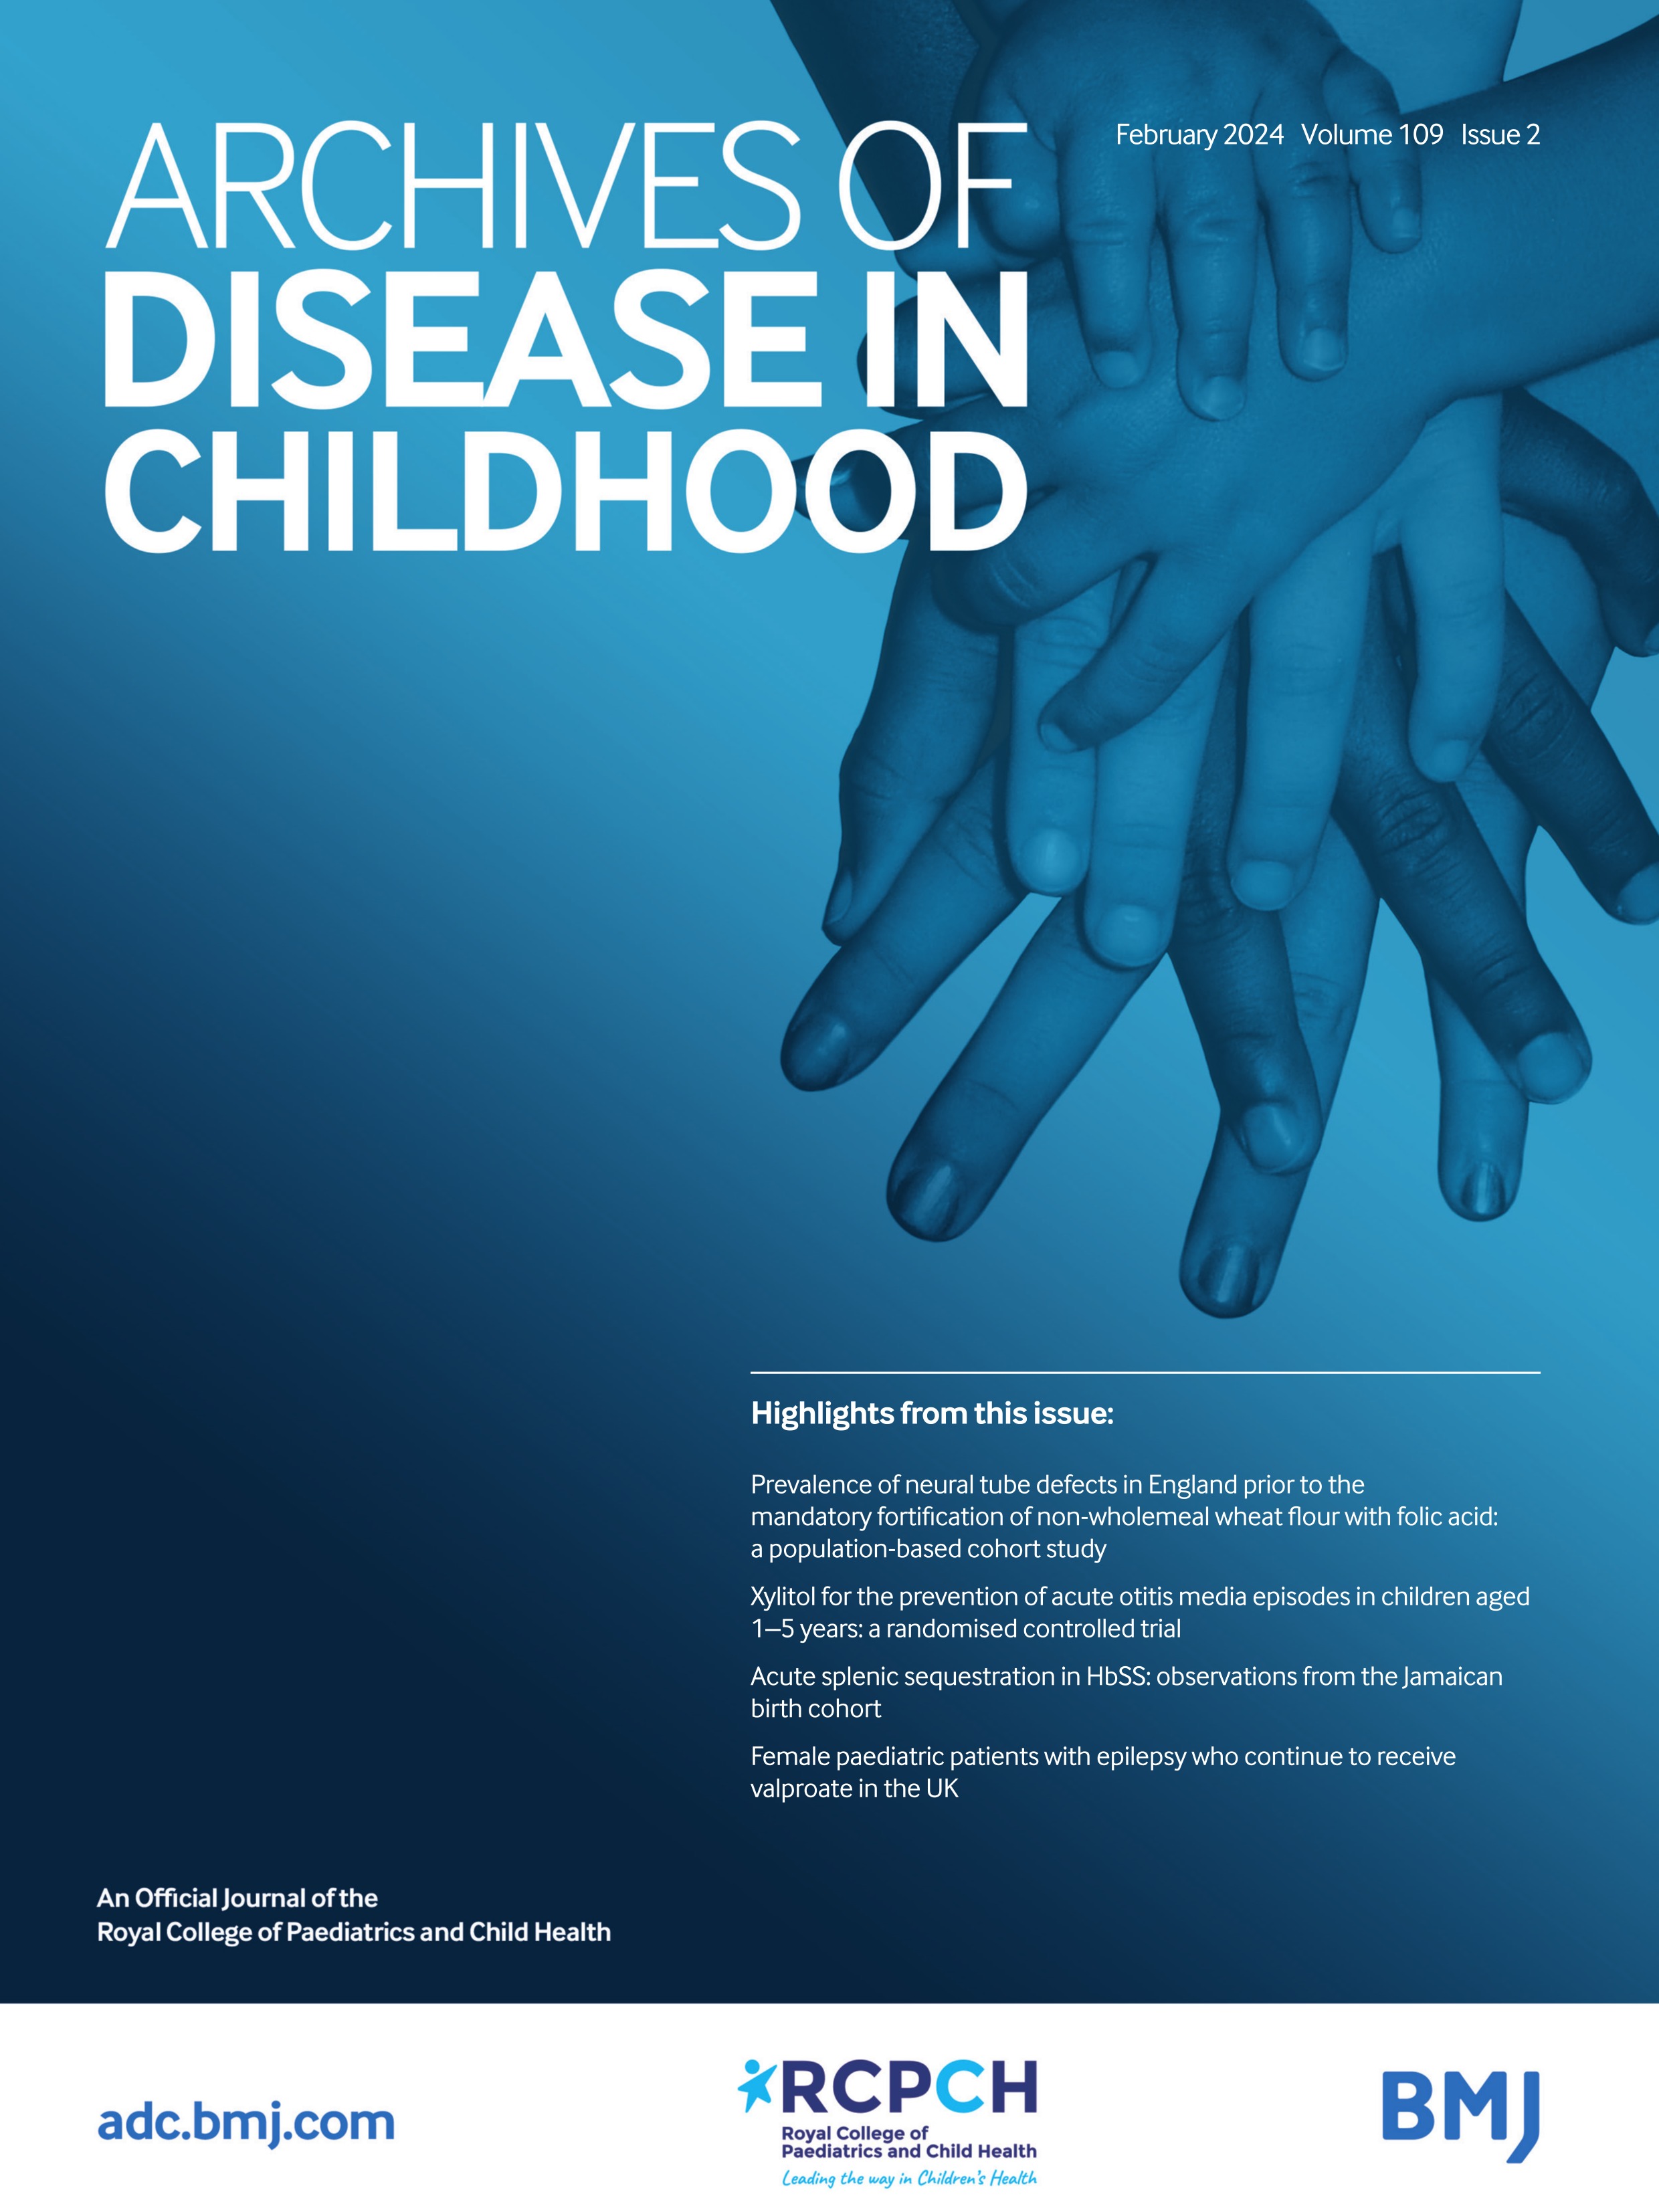 COVID-19 pandemic and language development in children at 18 months: a repeated cross-sectional study over a 6-year period in Japan